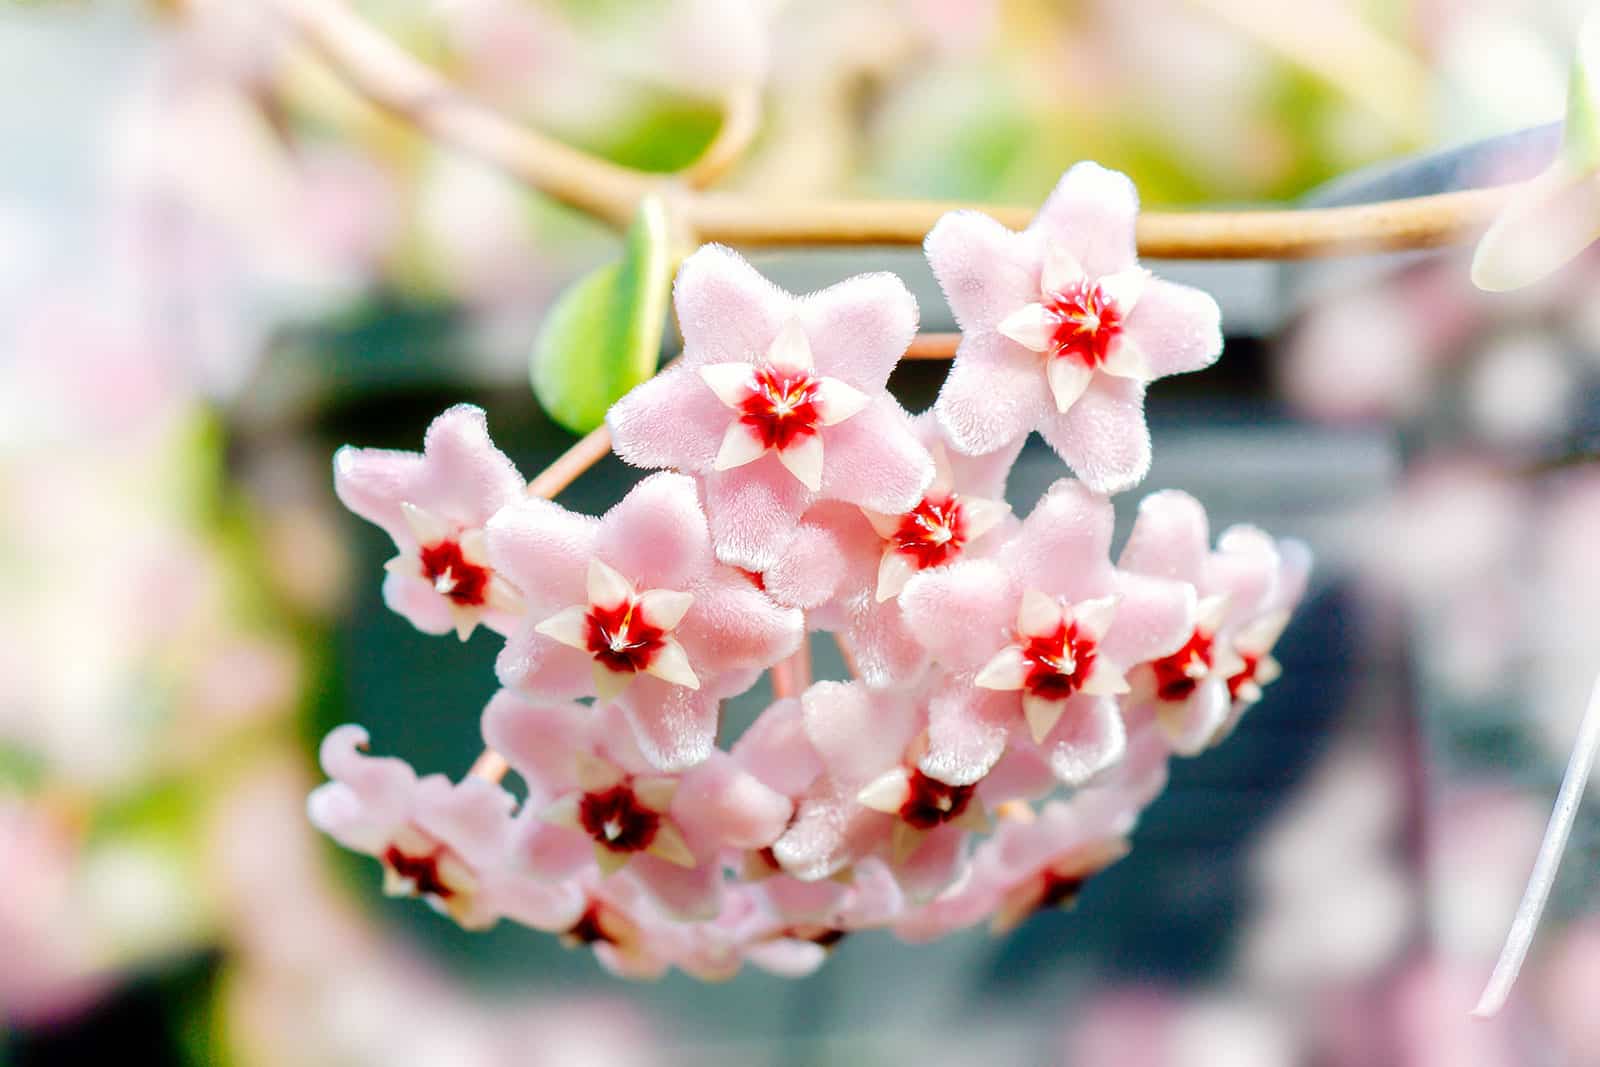 Close-up of pinkish flowers from a Hoya carnosa (wax plant)